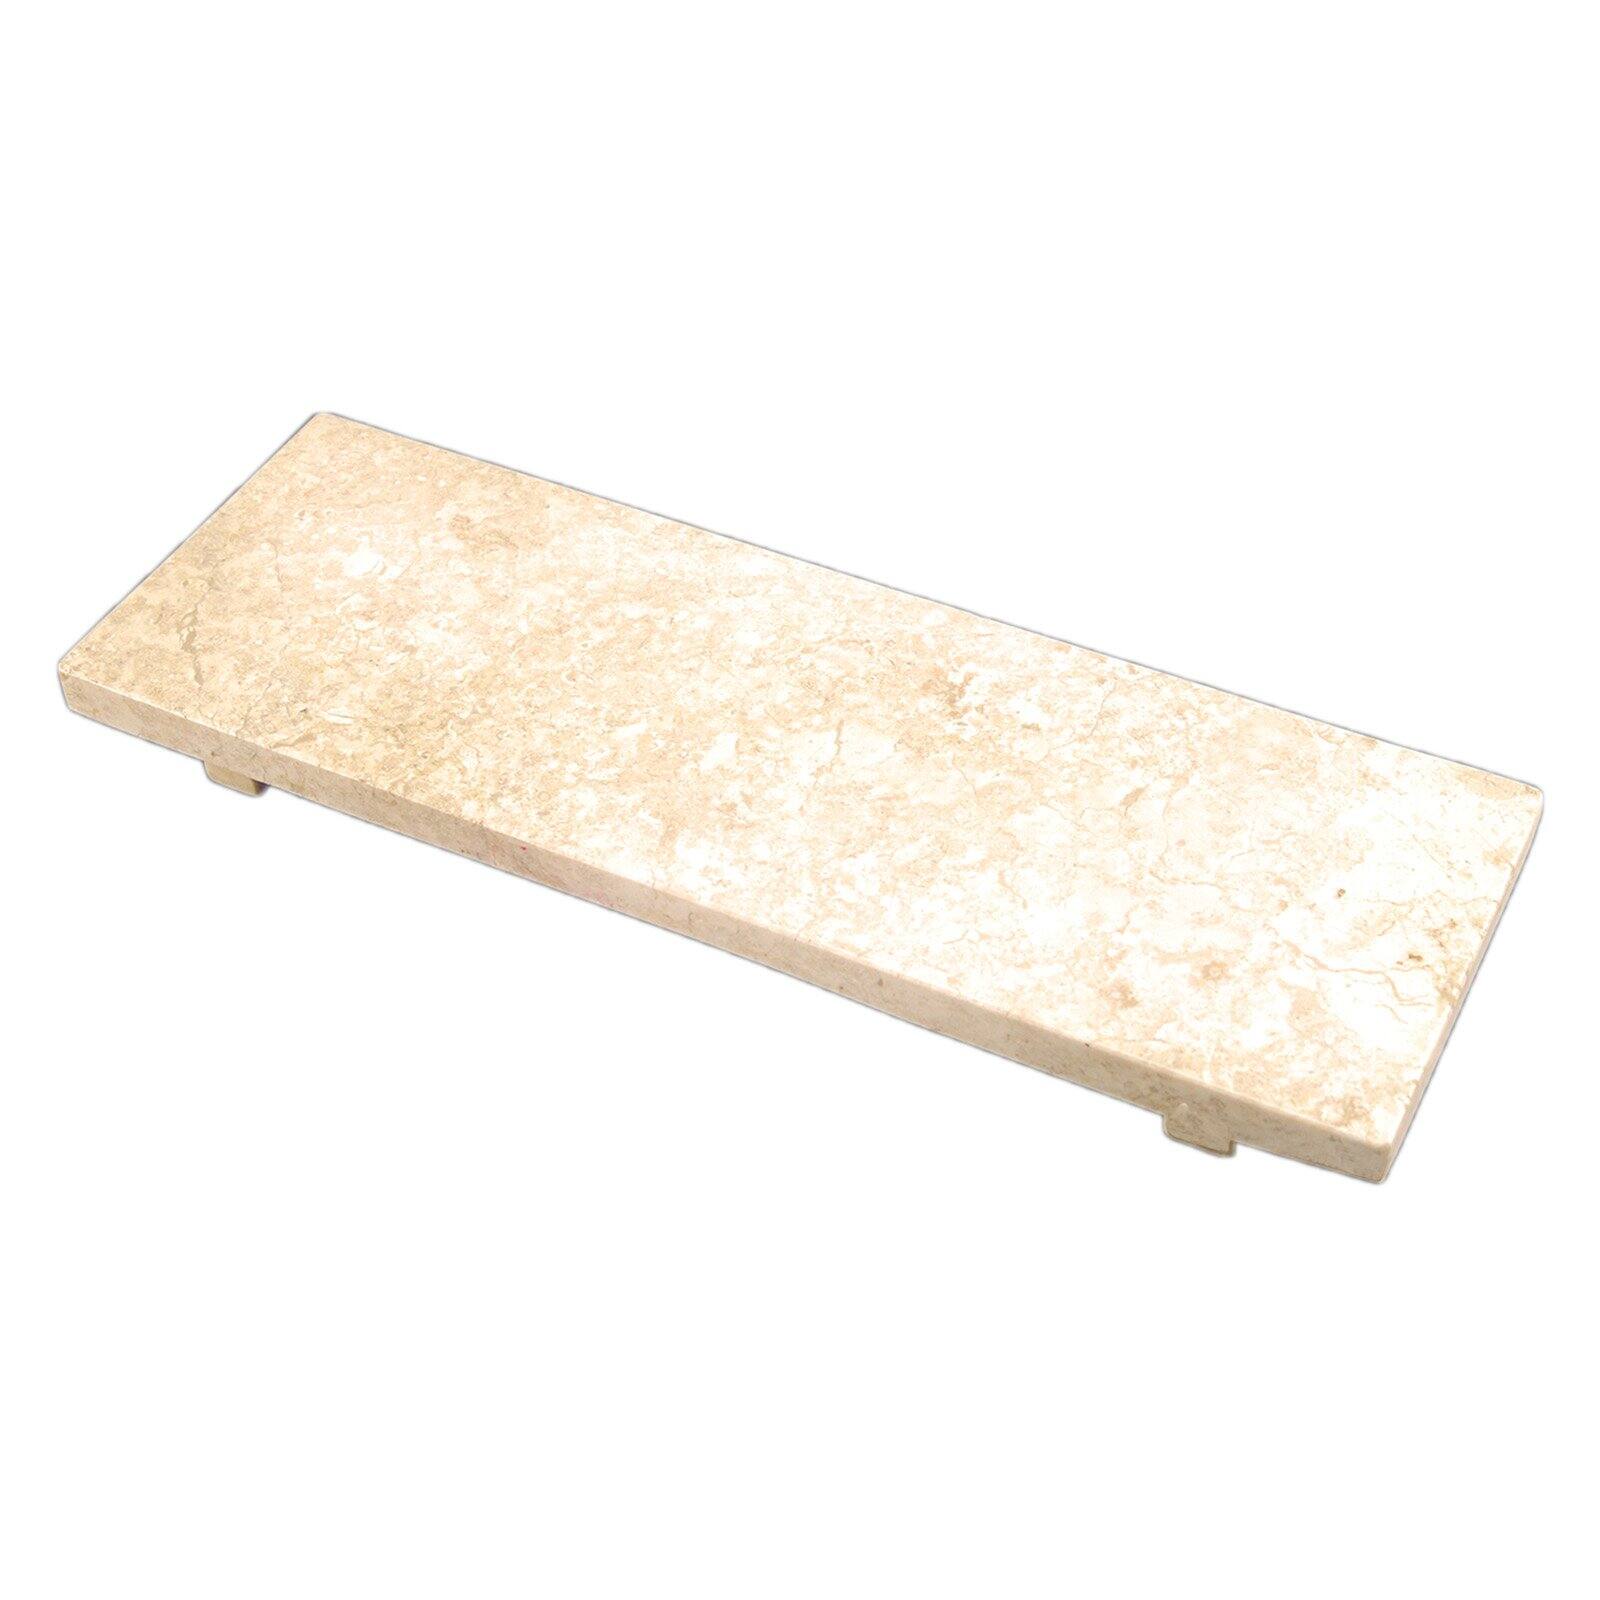 Creative Home Natural Champagne Marble Rectangular Serving Tray, Cheese Dessert Appetizer Serving Board, Pastry Serving Platter, Beige - image 1 of 1